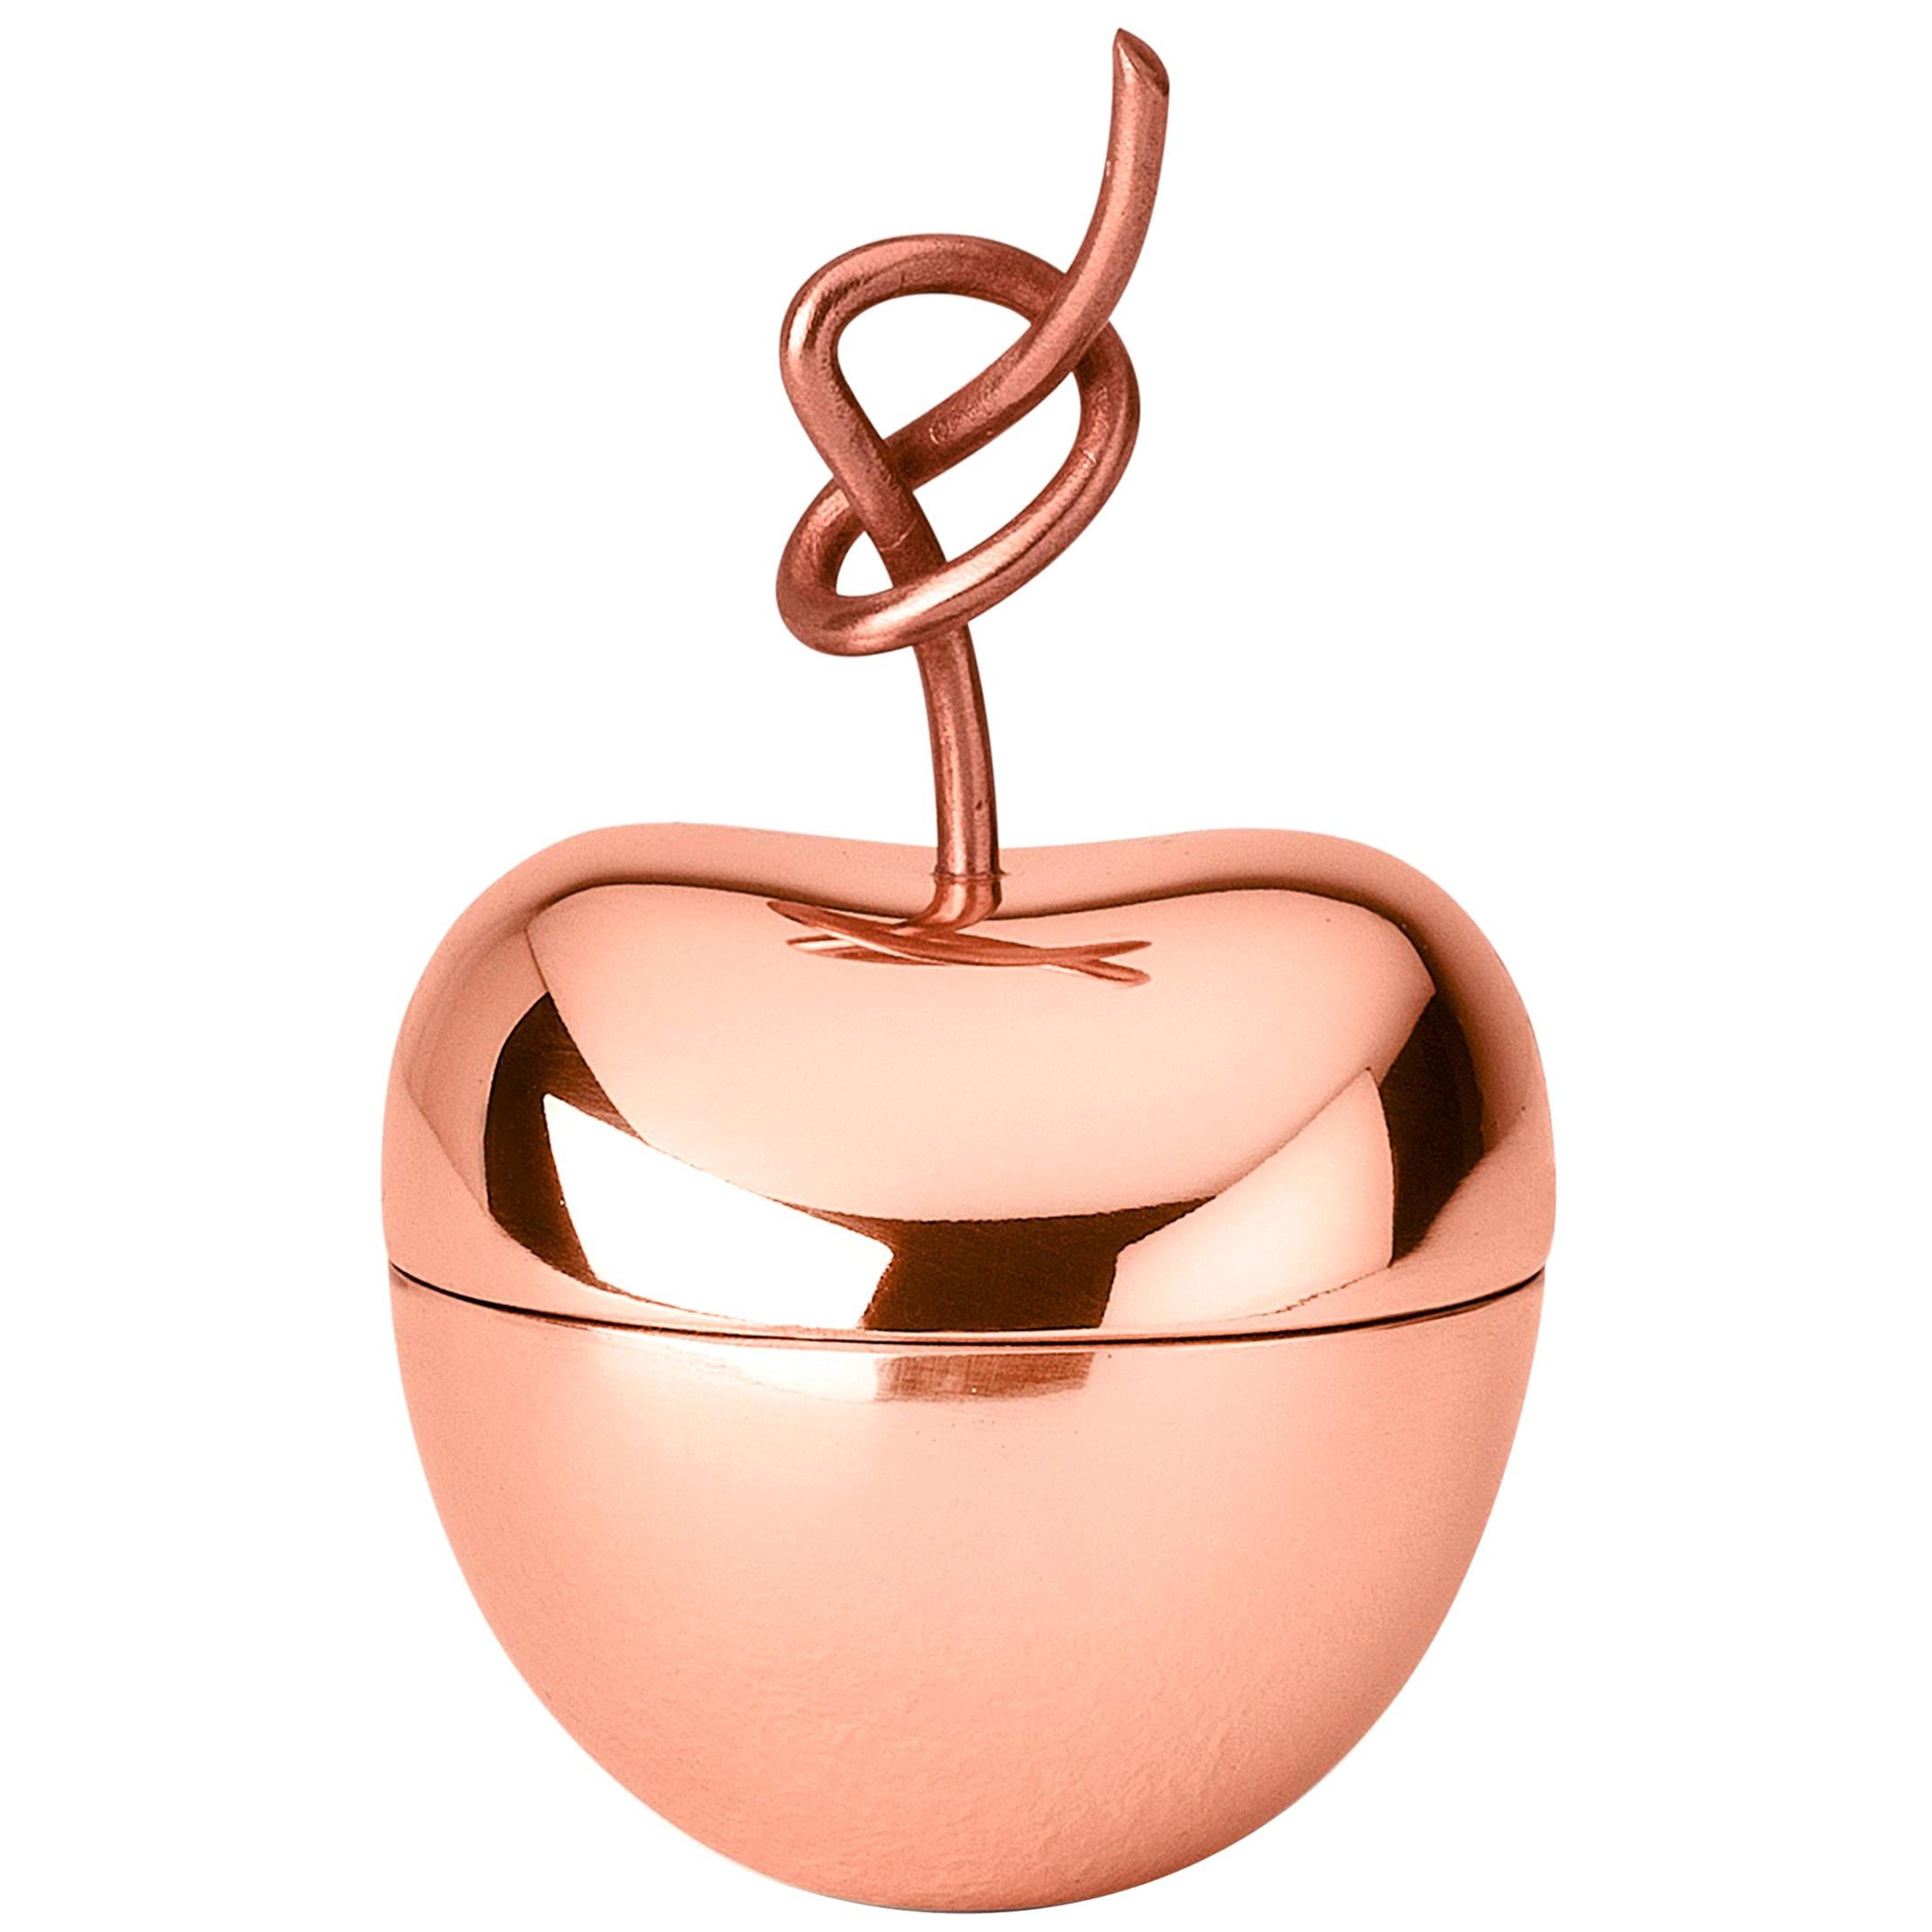 Ghidini 1961 Knotted Cherry Medium Box in Copper-Plated Brass by Nika Zupanc